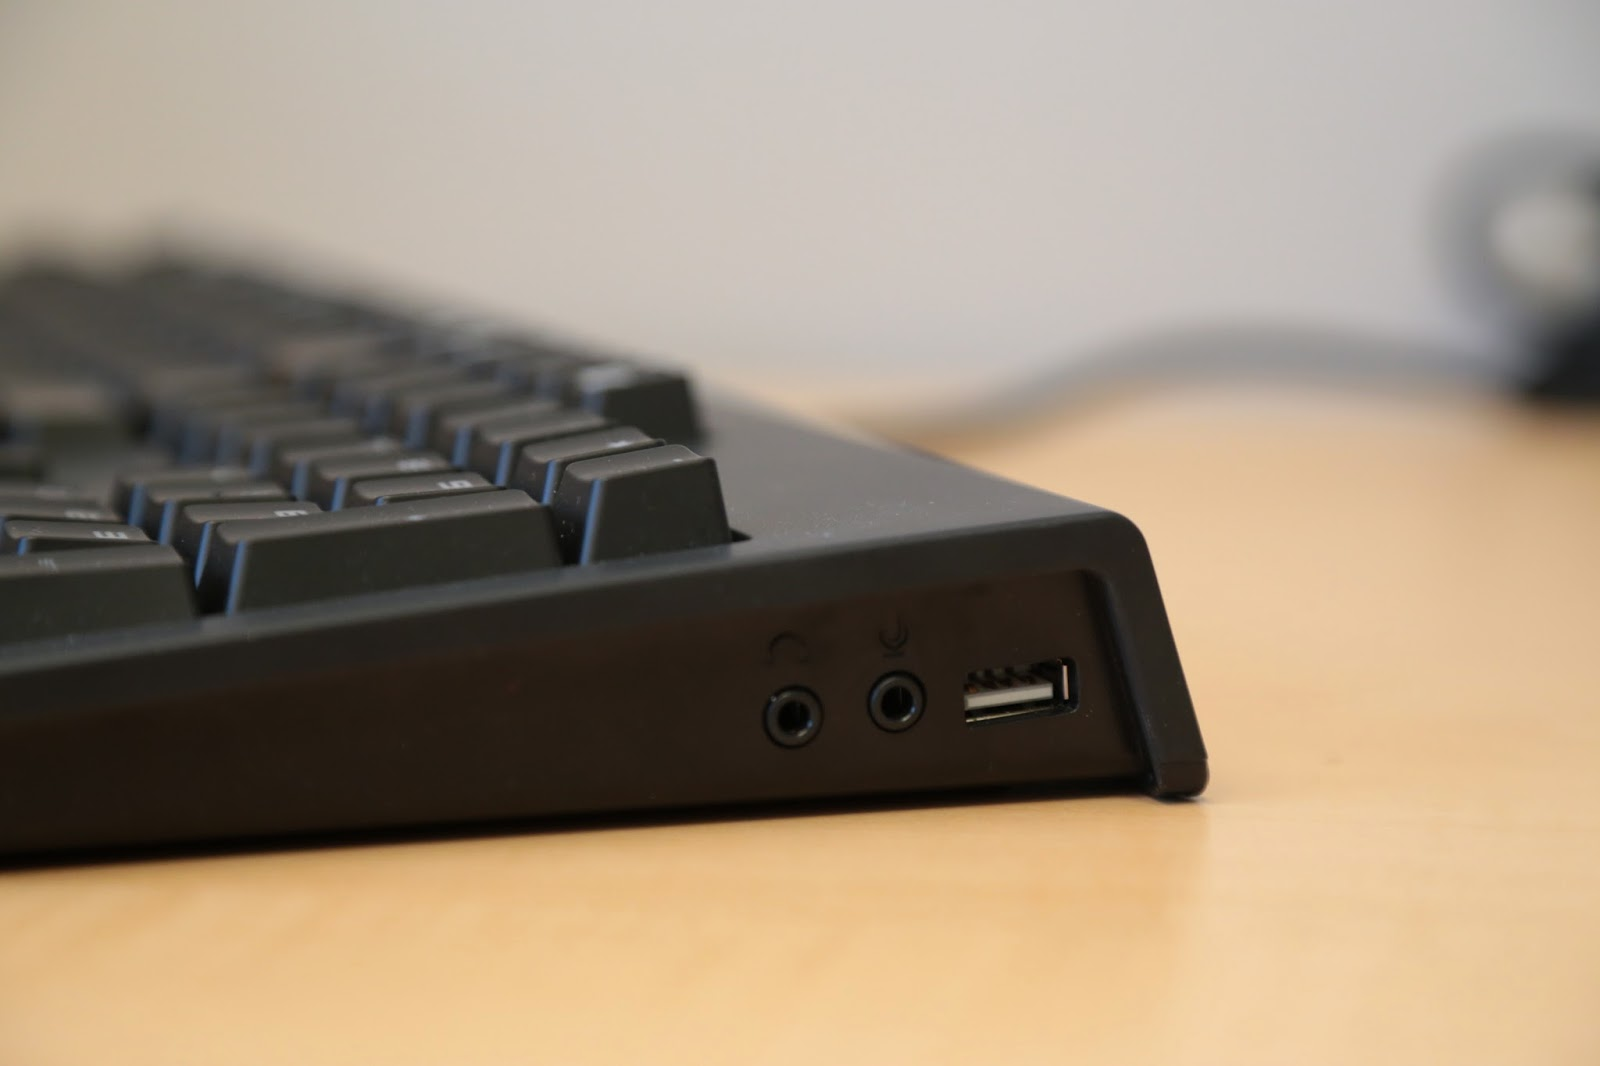 The USB port could be damaged and be the cause of your gaming keyboard not working. 